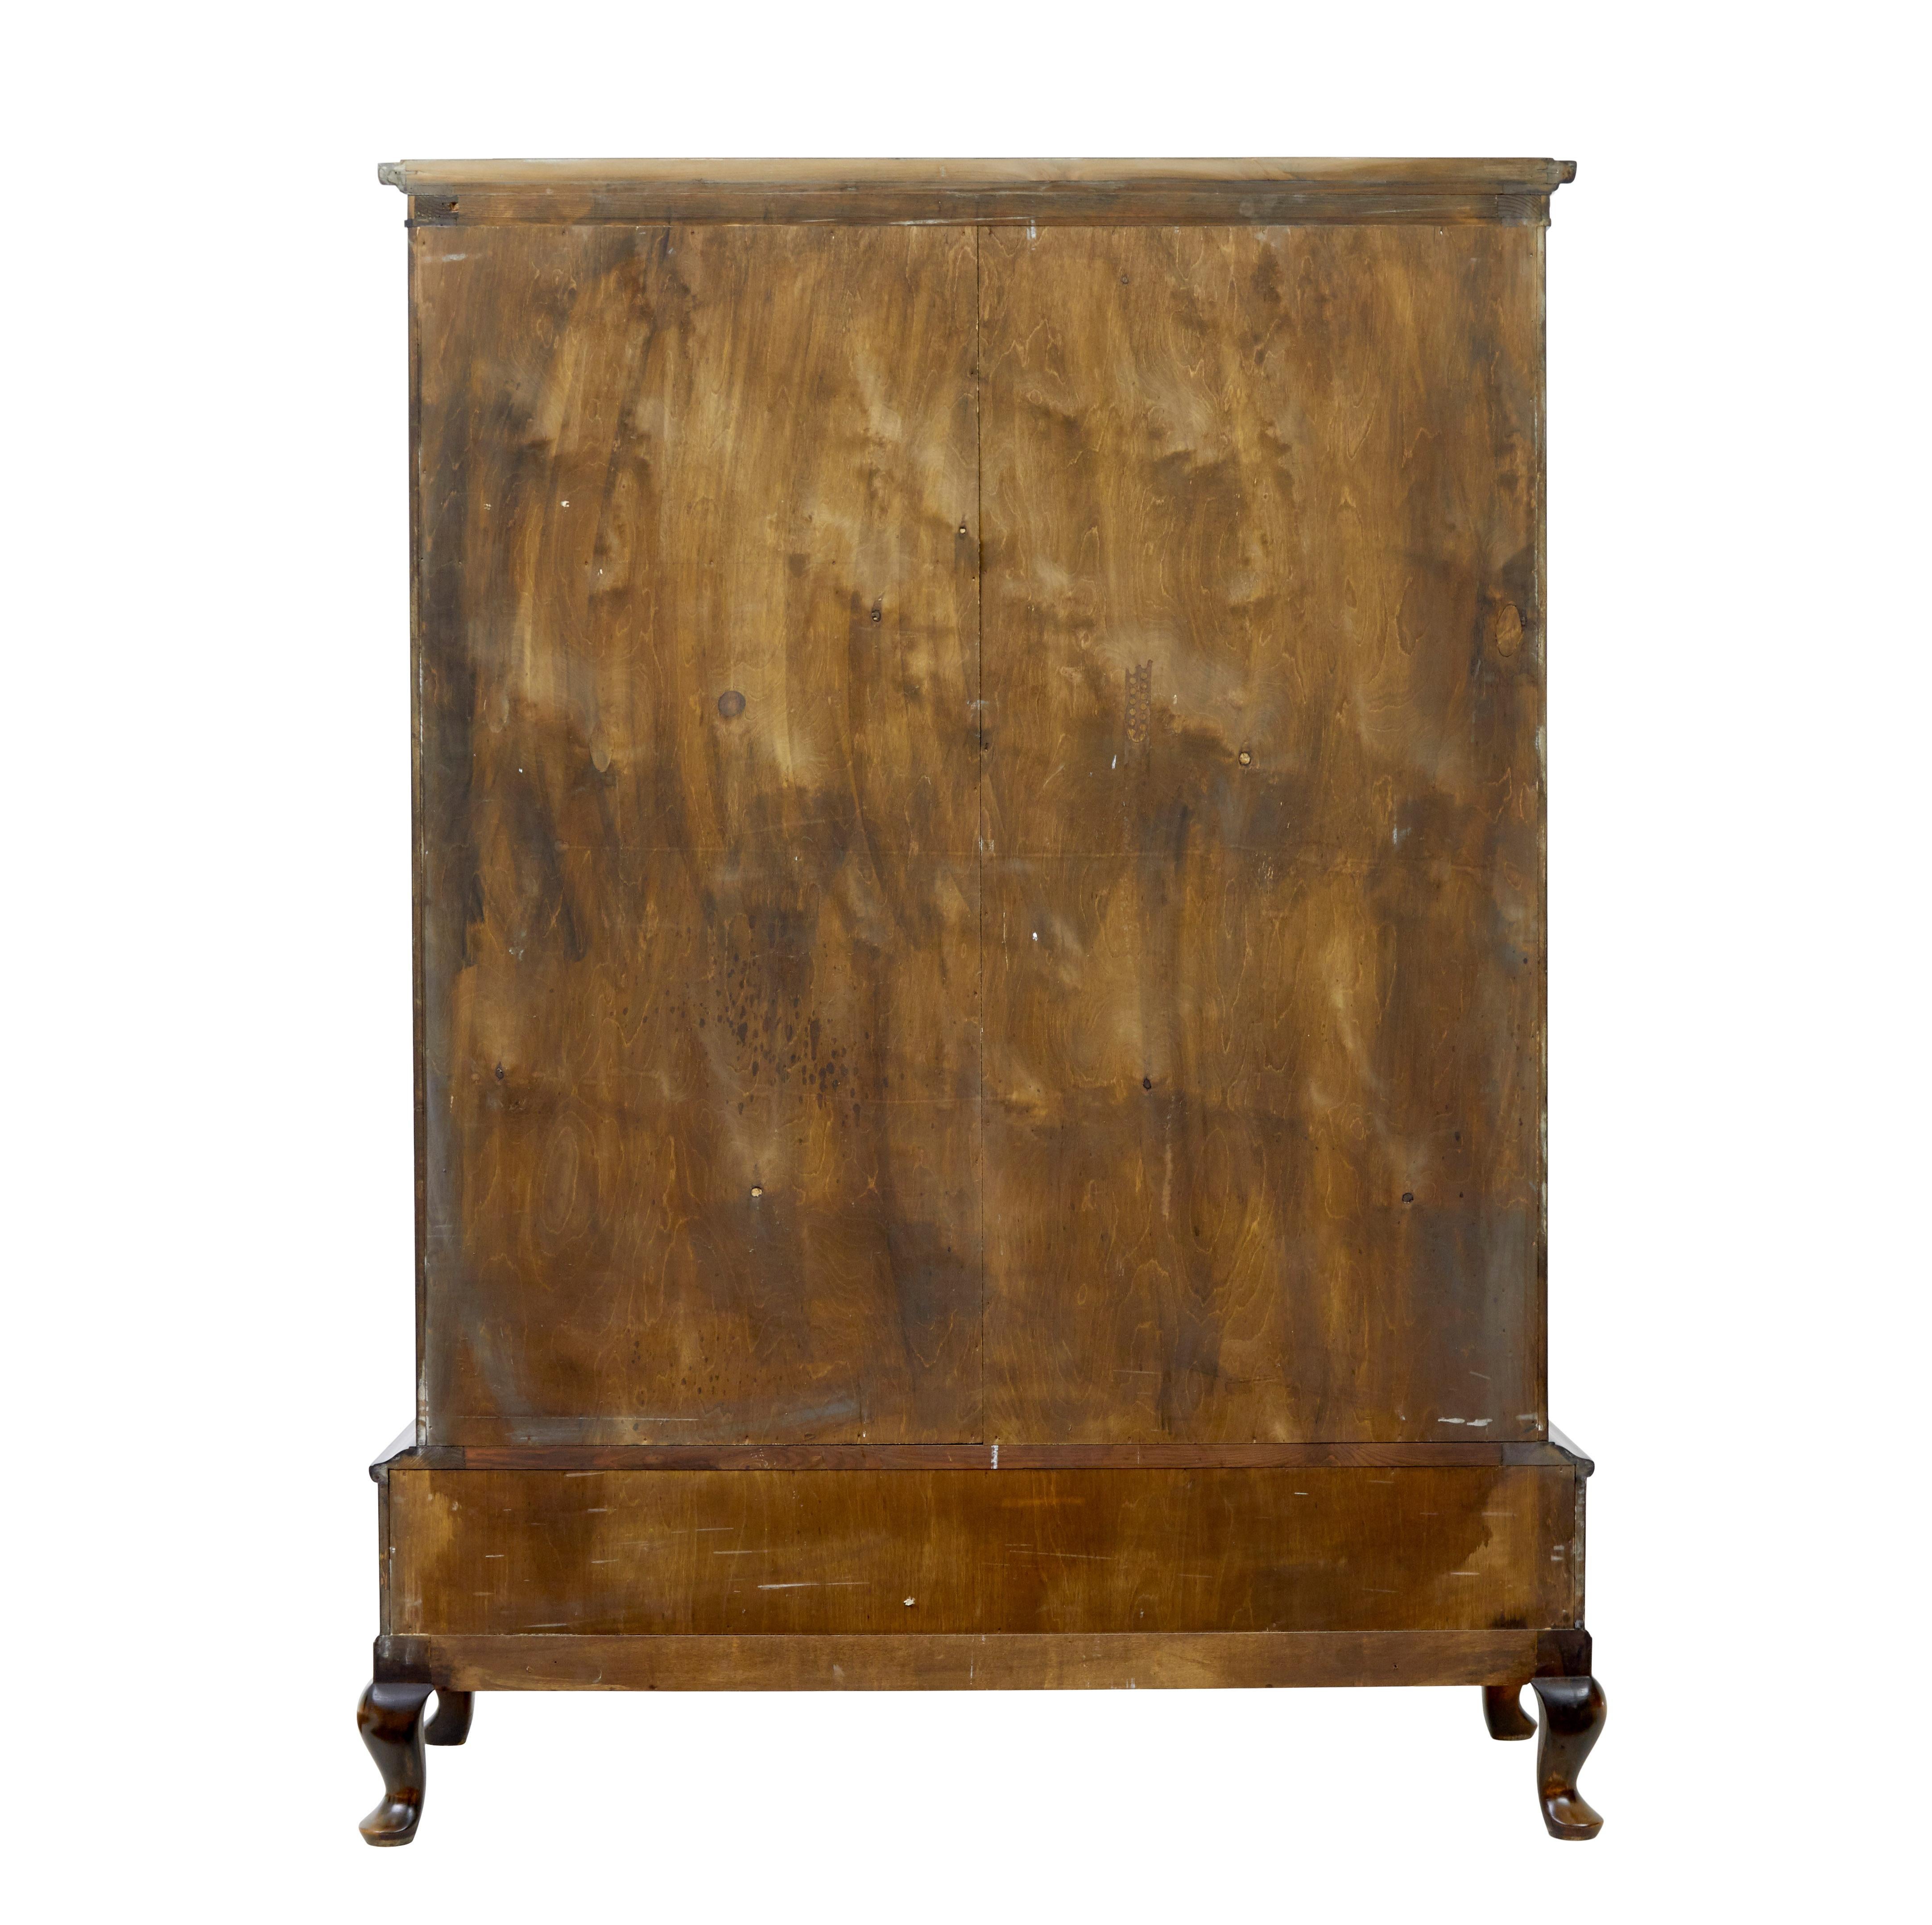 Carved Mid 20th century burr birch cabinet by Bodafors For Sale